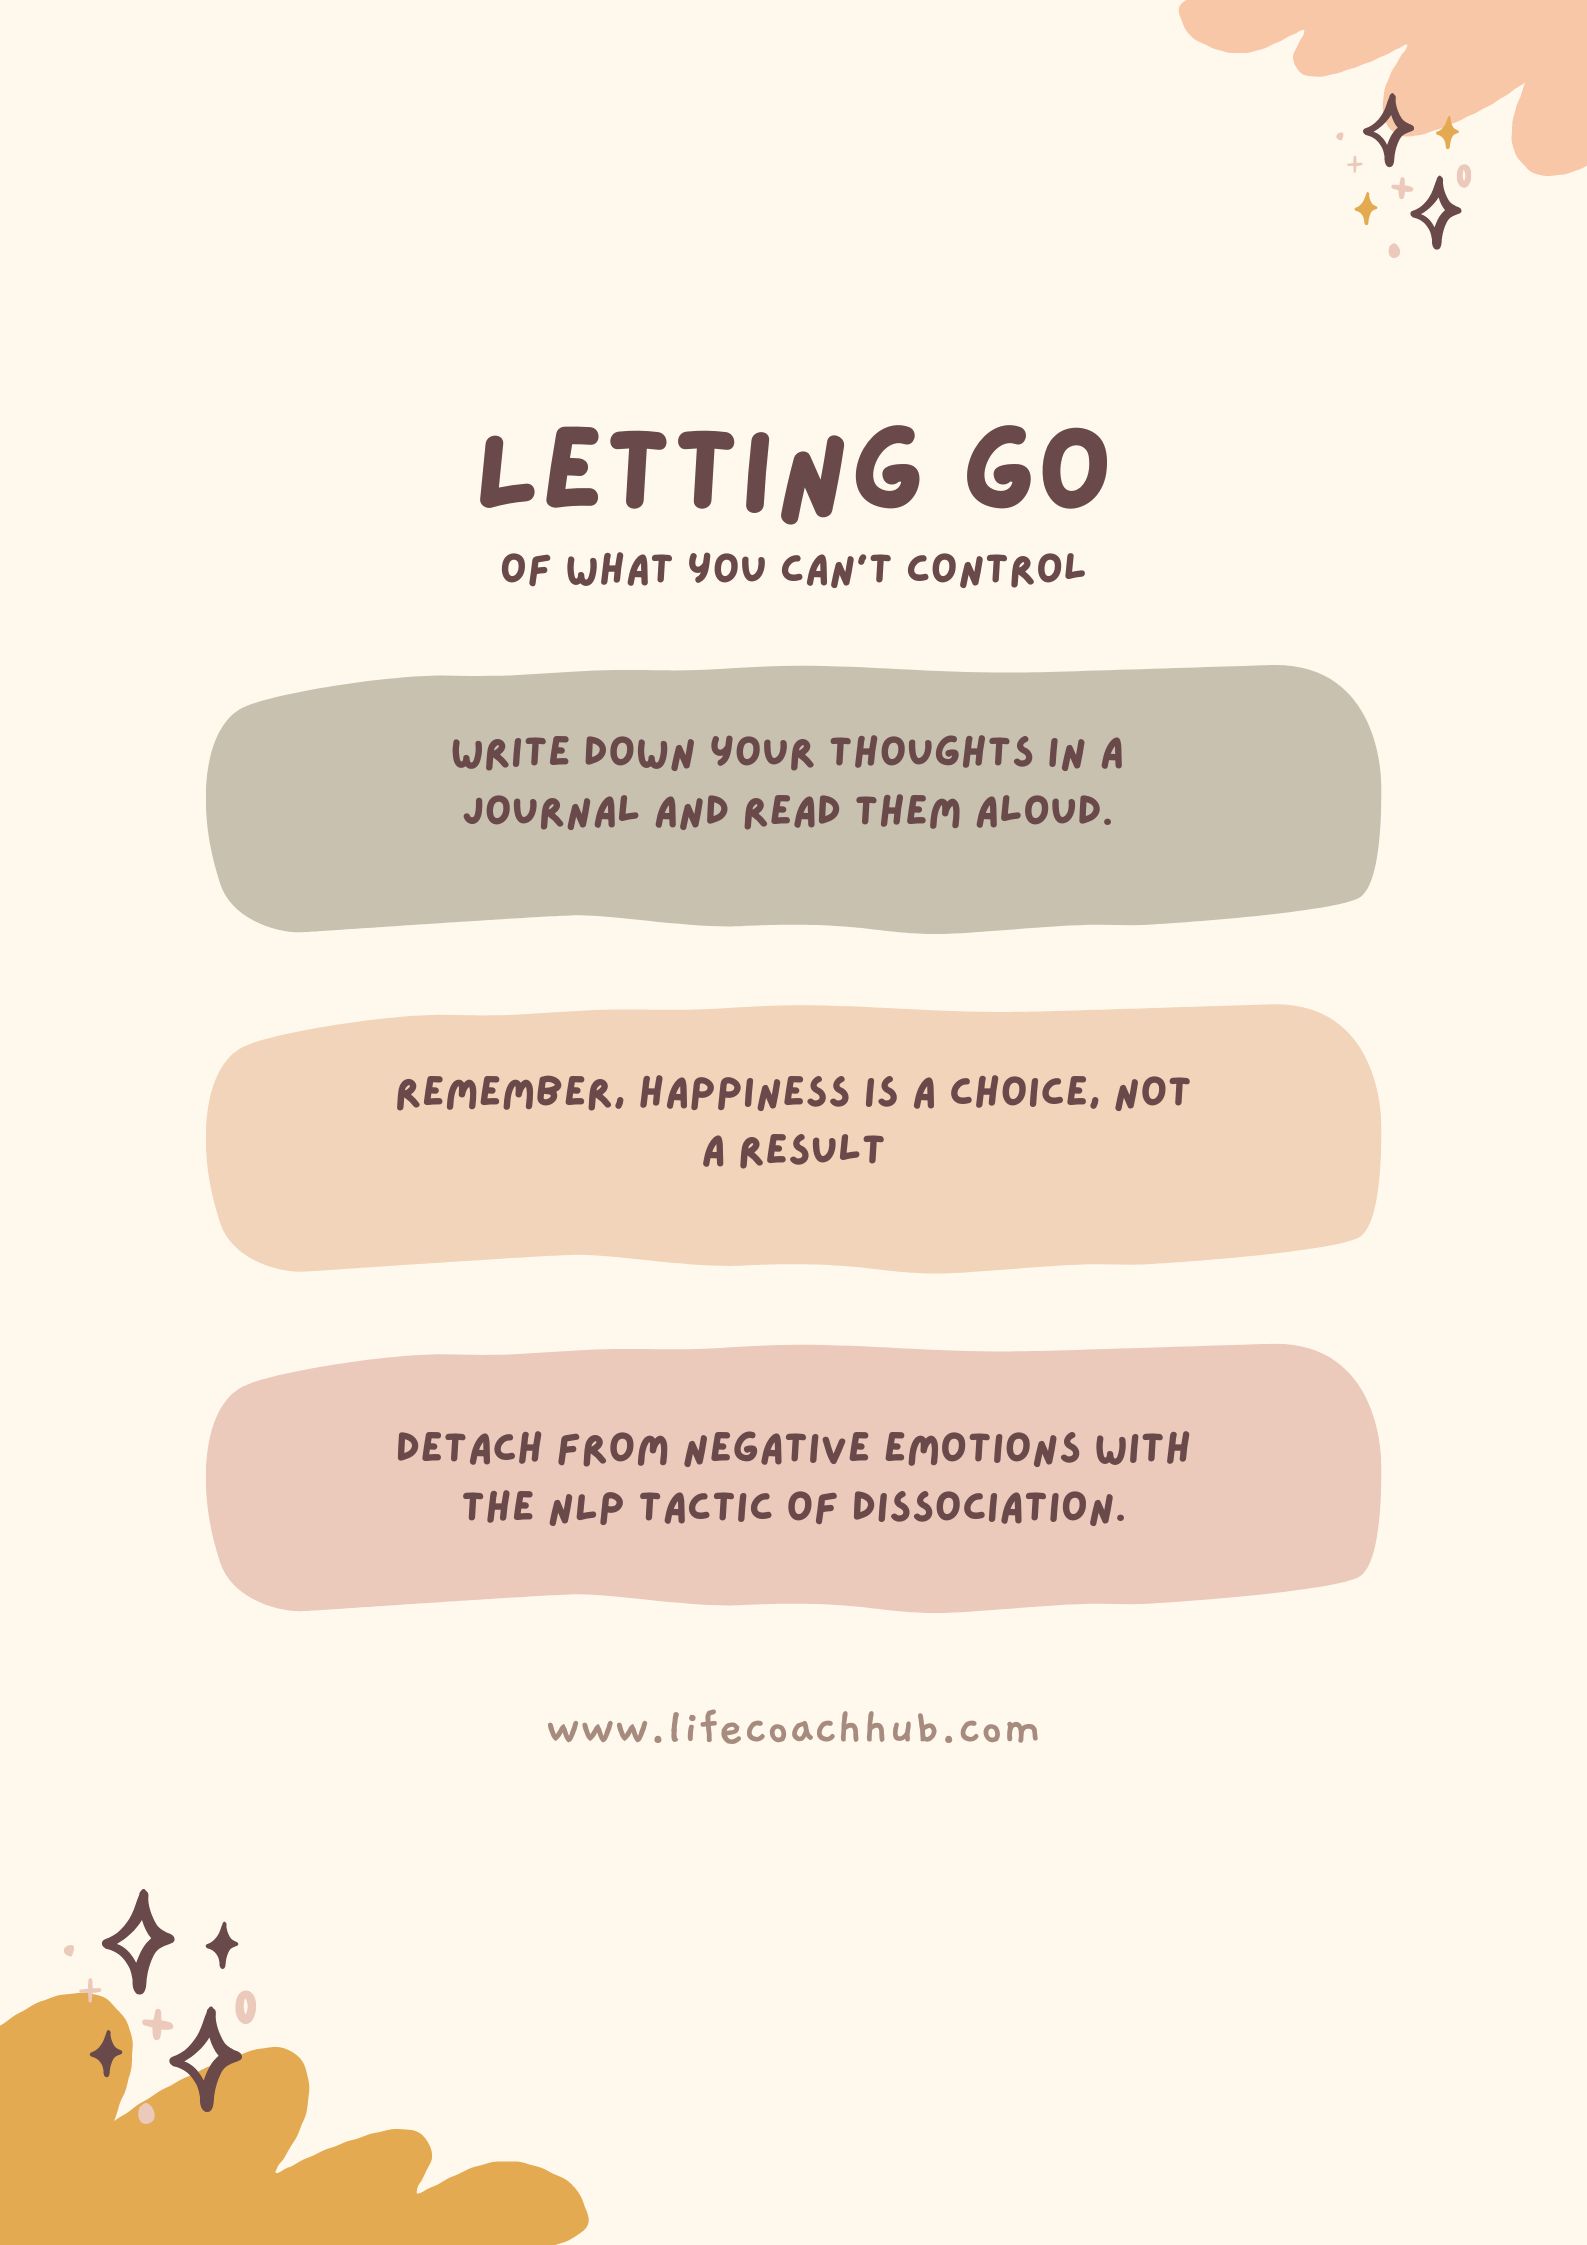 Letting go of what you can't control, write down your thoughts in a journal and read them aloud, remember, happiness is a choice, not a result, detach from negative emotions with the NLP tactic of dissociation, coaching tip